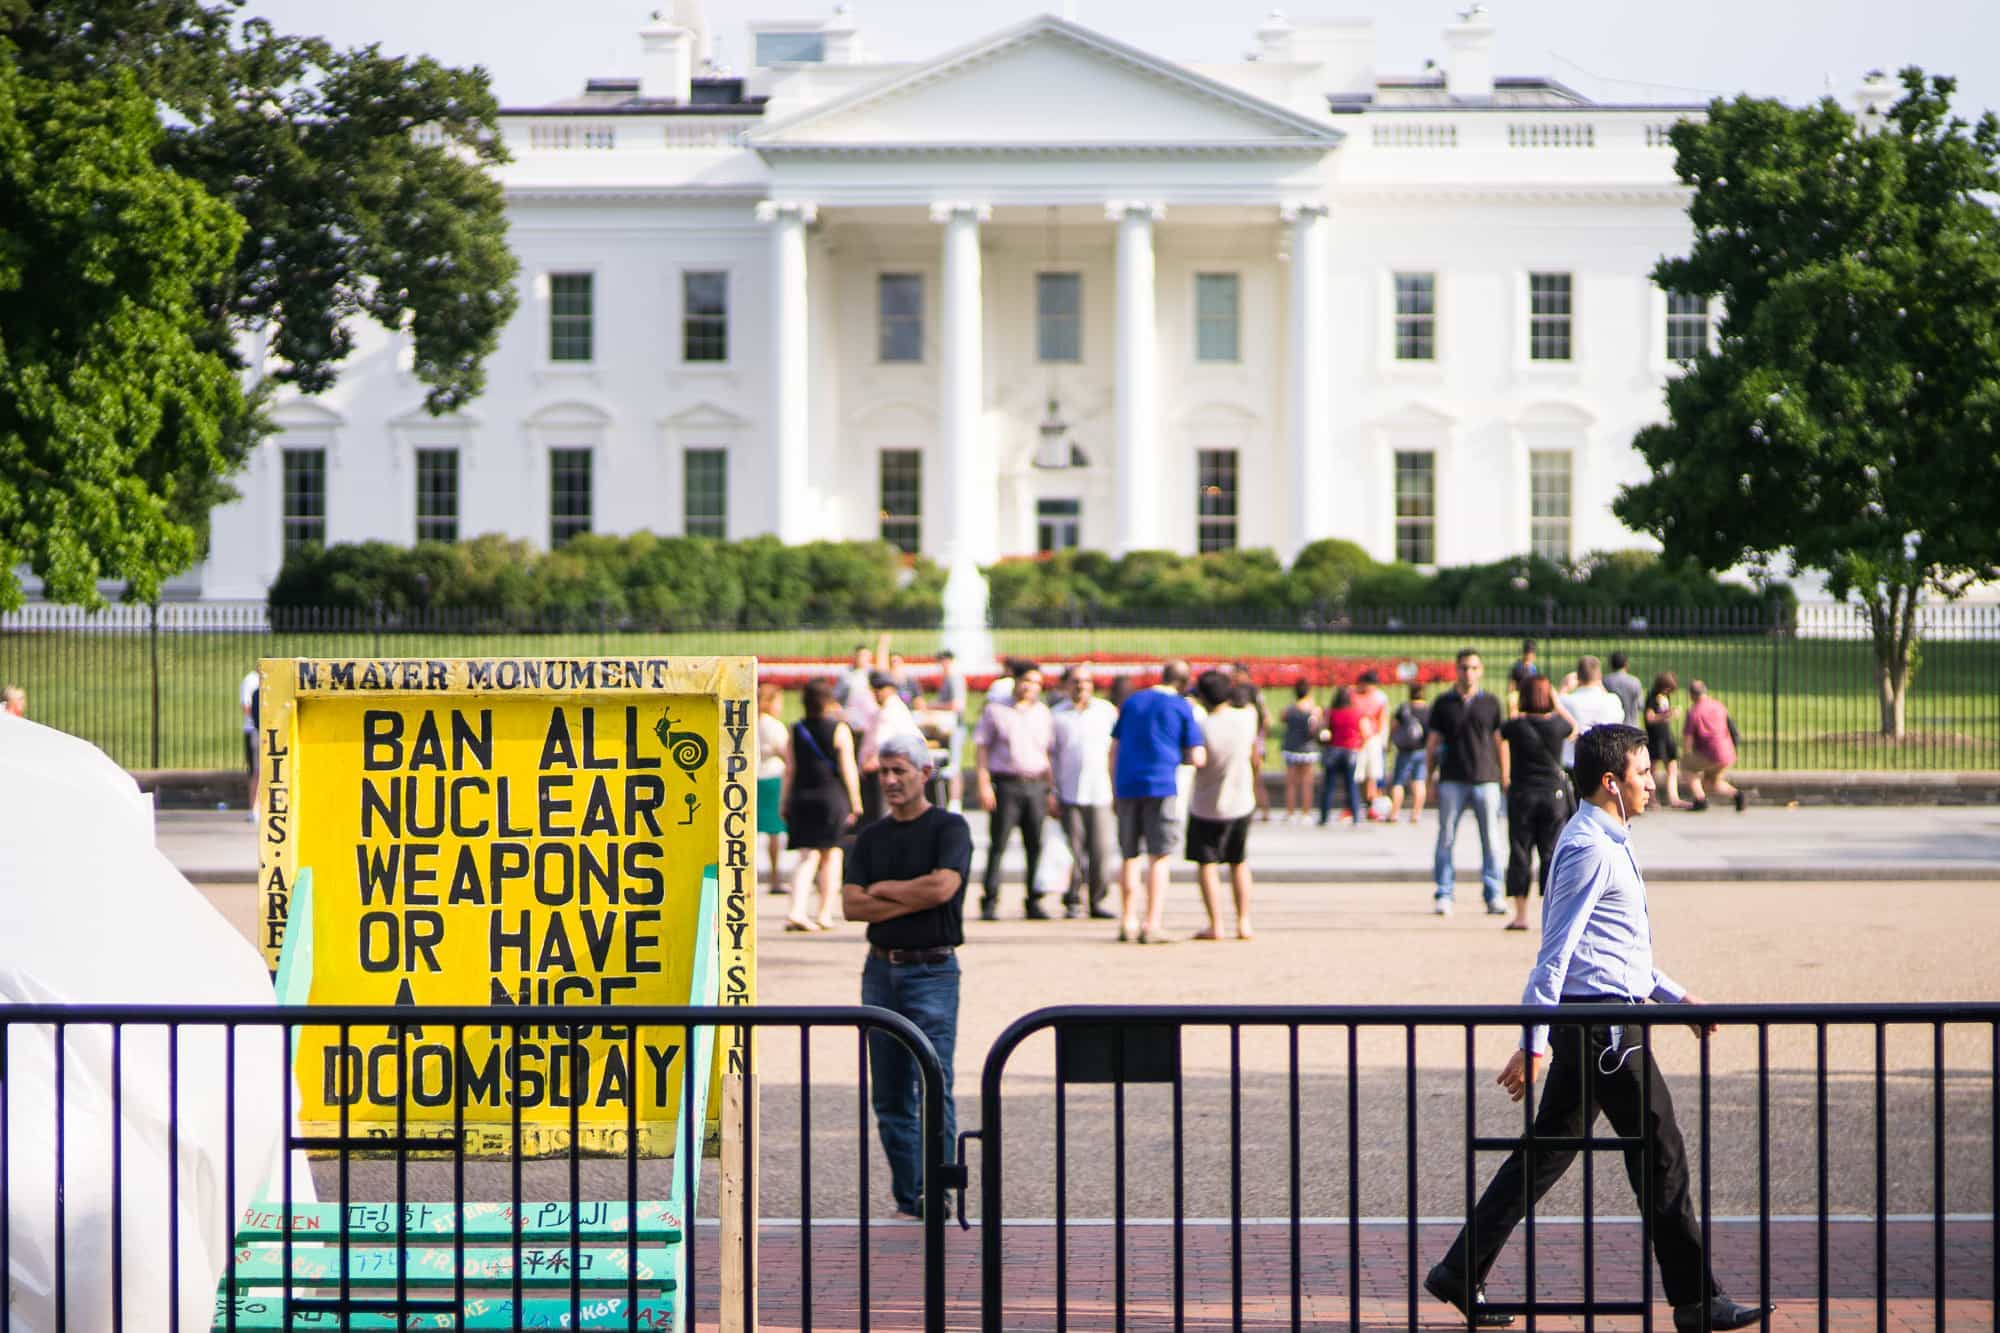 In Washington, D.C. a protestor camps in front of the White House with a sign emploring the banning of all nuclear weapons.